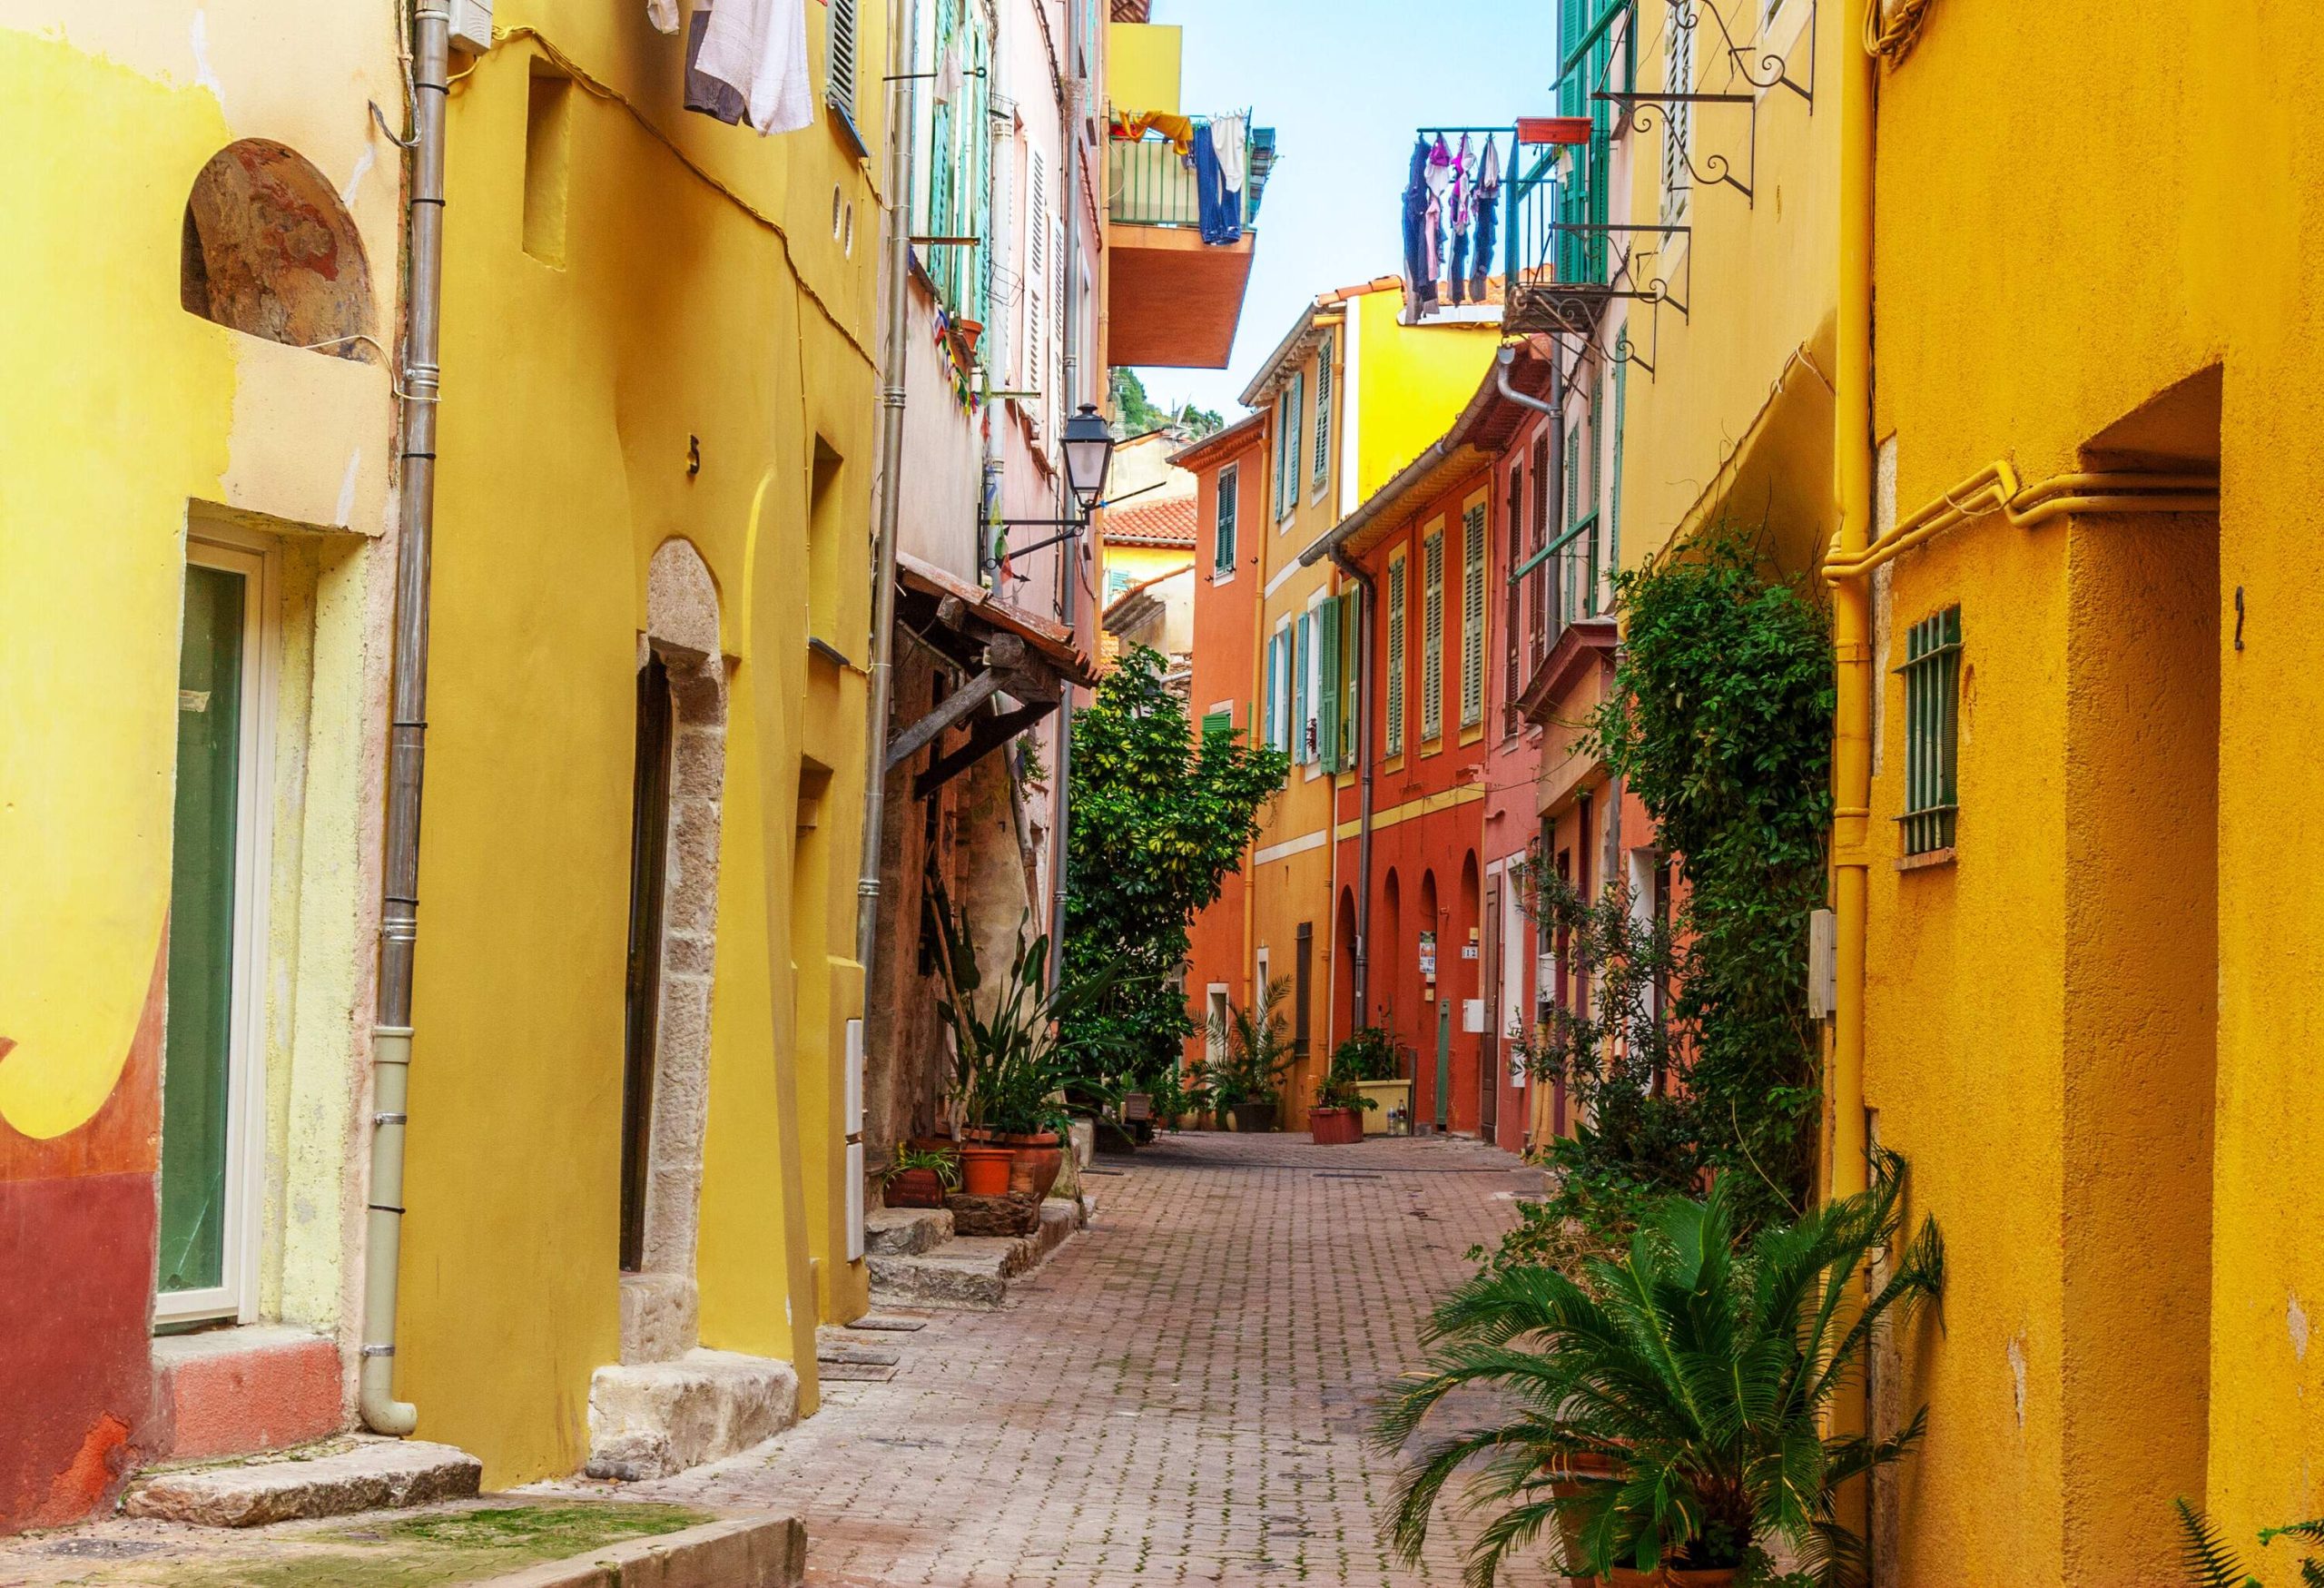 Houses painted in vibrant colours along a narrow paved lane.